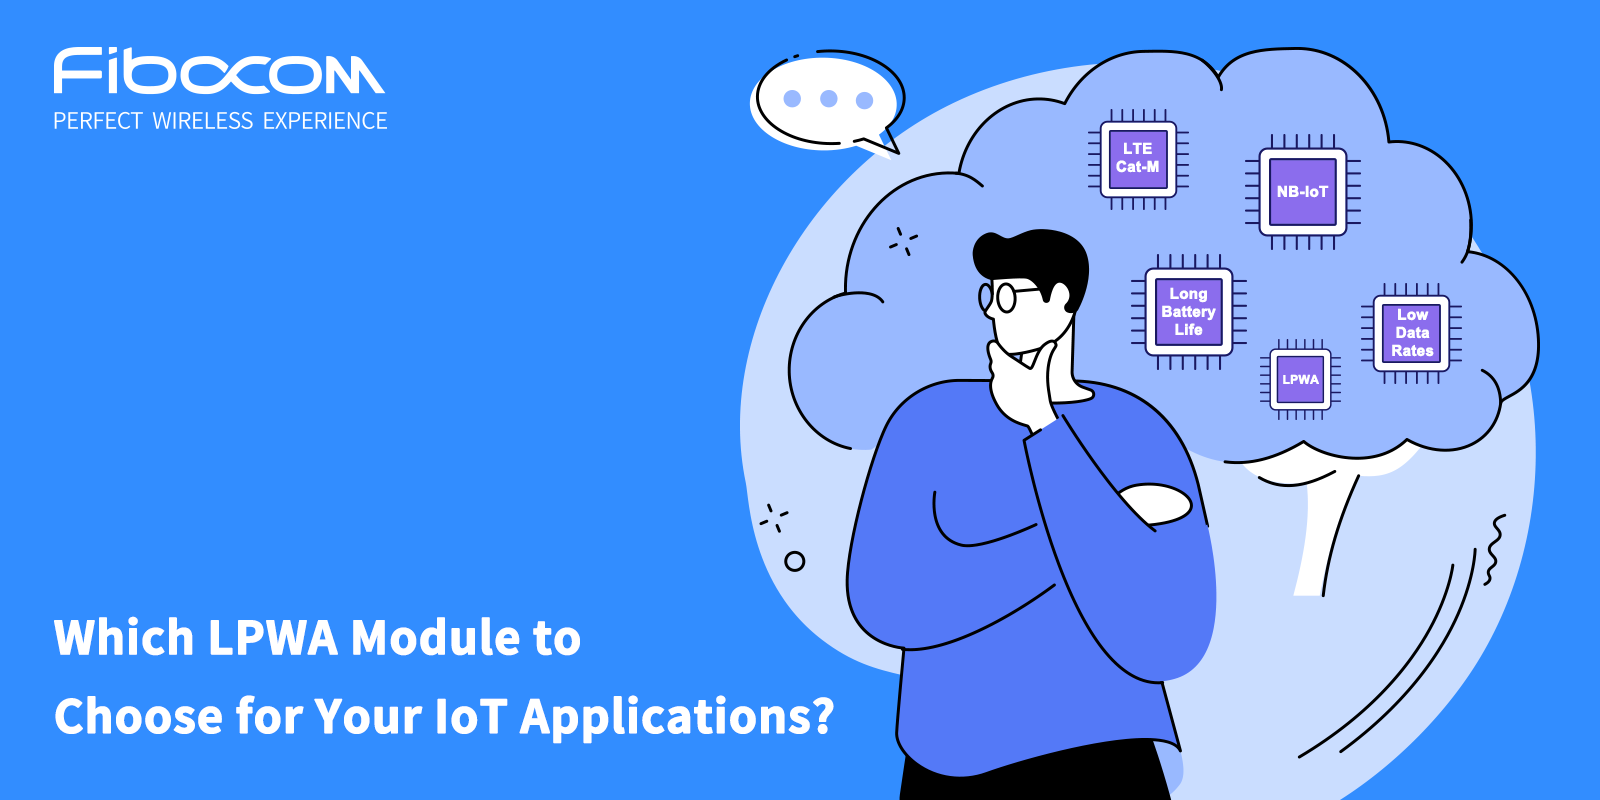 Which LPWA Module to Choose for Your IoT Applications?